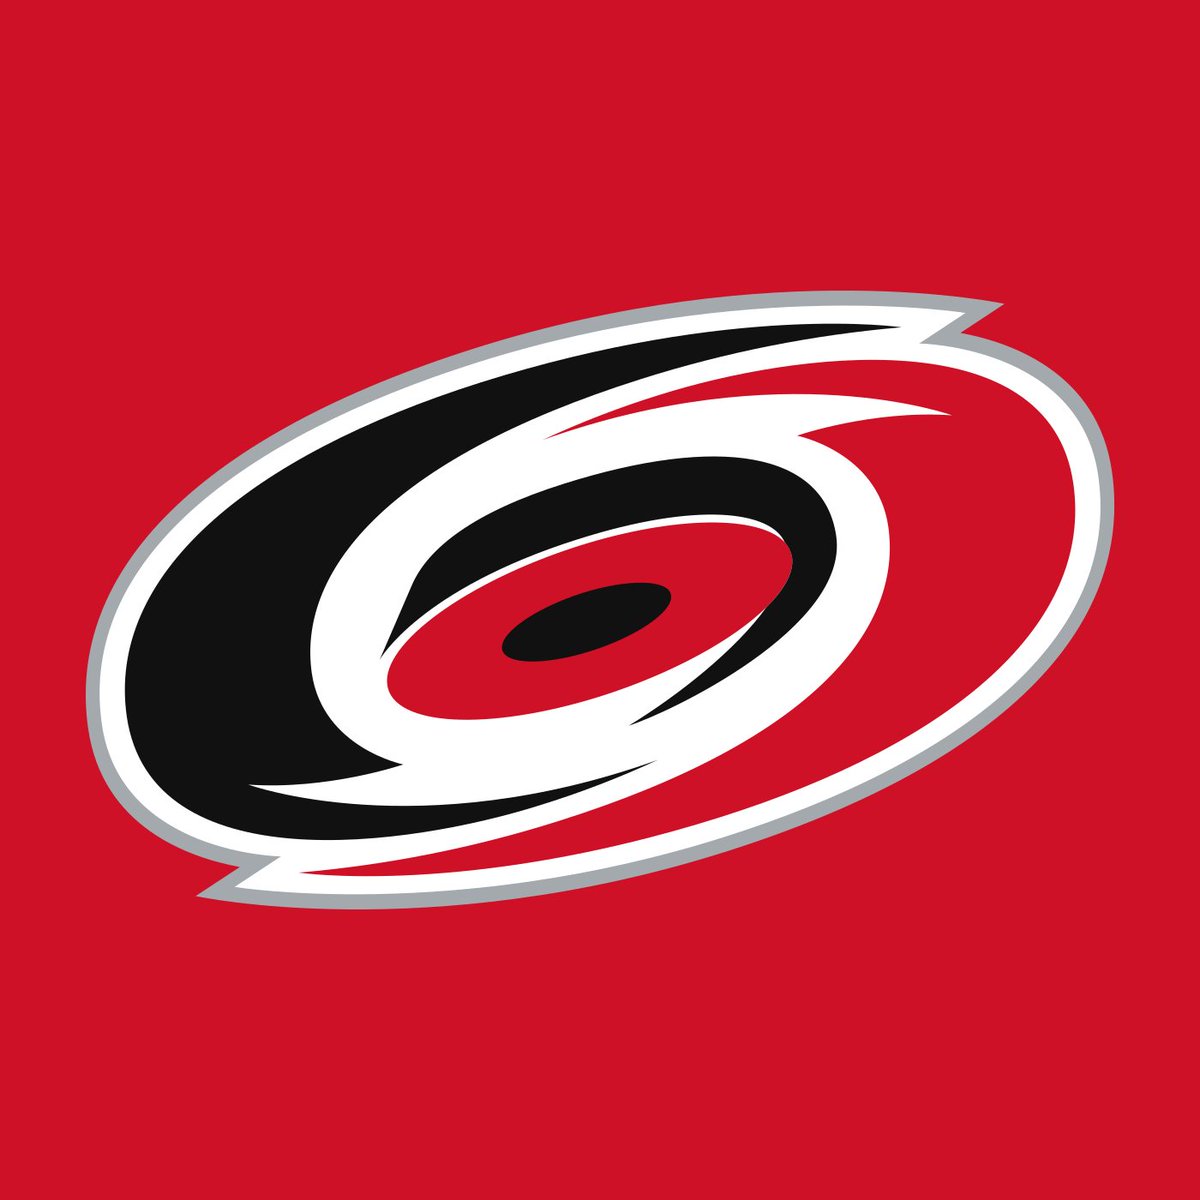 With the 202nd overall selection in the NHL Draft, the Carolina Hurricanes are proud to select: Bully Maguire. https://t.co/ms6jqOAEP2